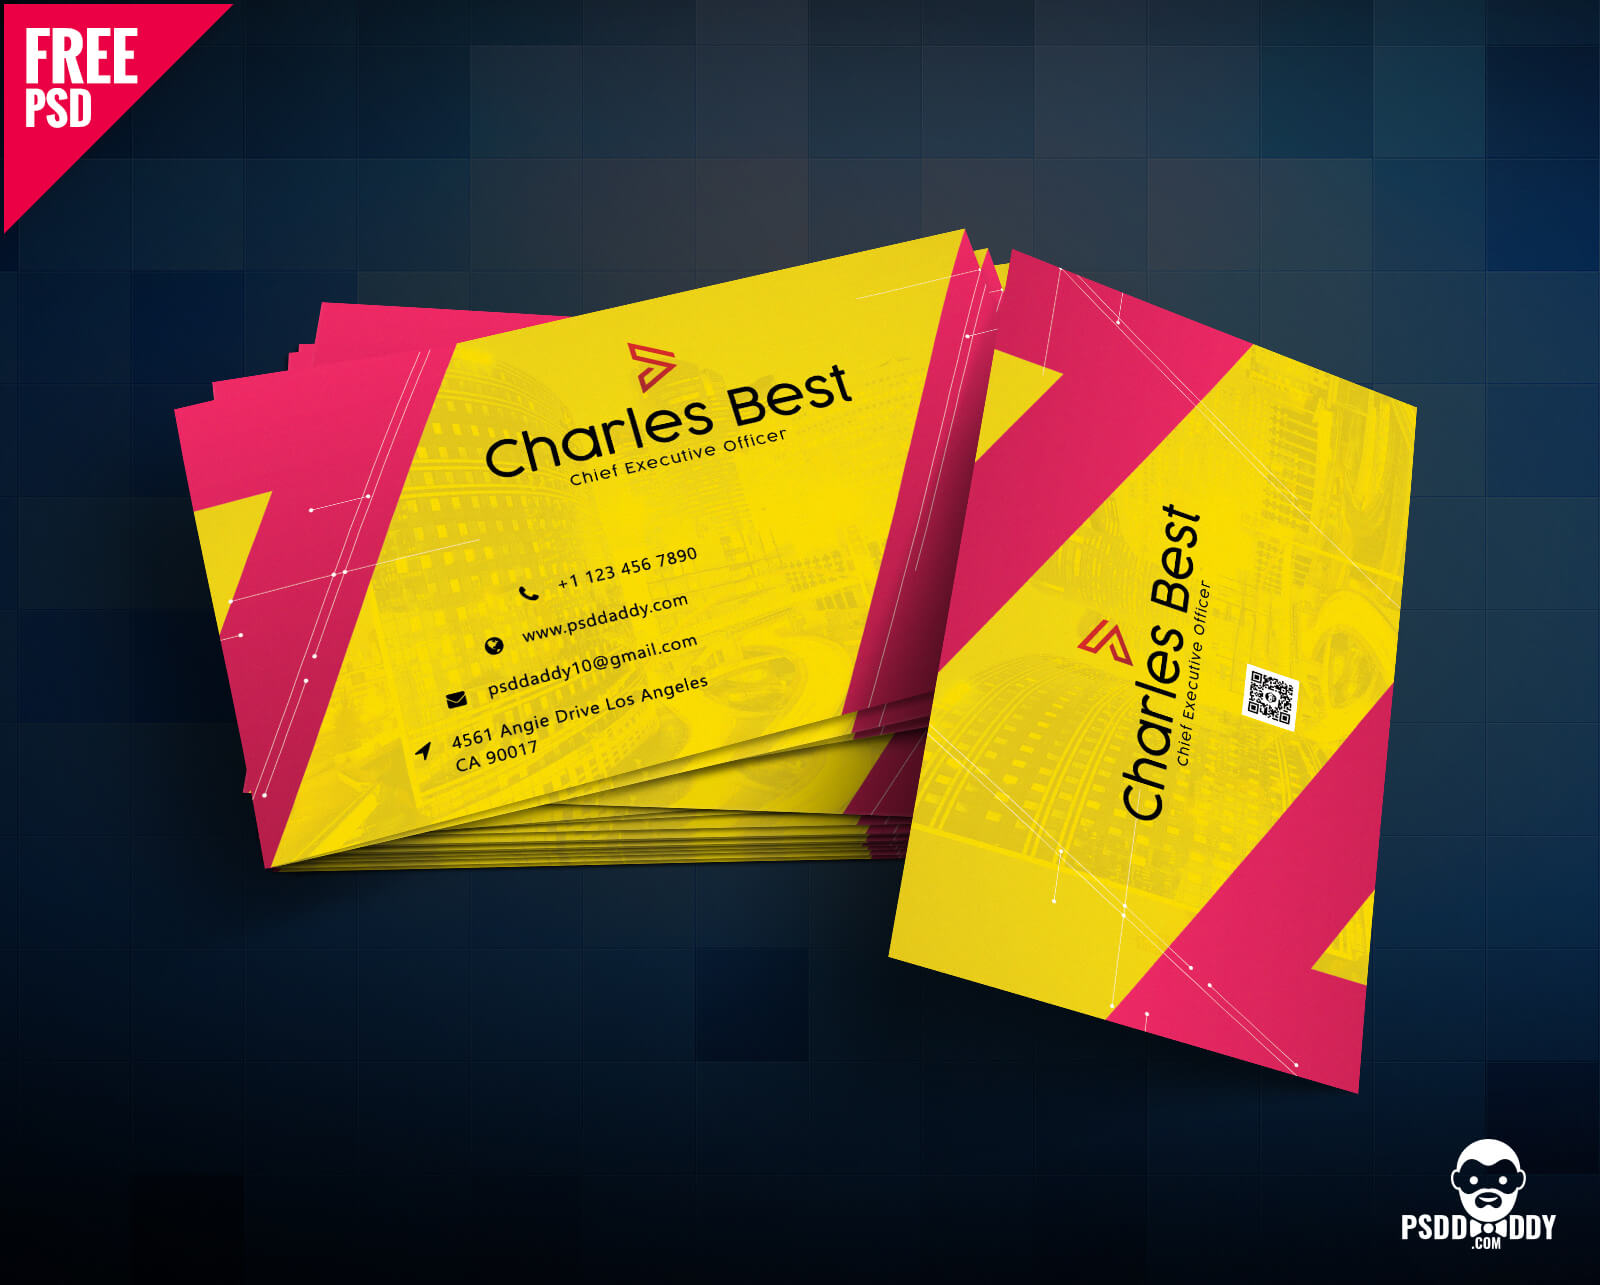 Download] Creative Business Card Free Psd | Psddaddy Inside Download Visiting Card Templates